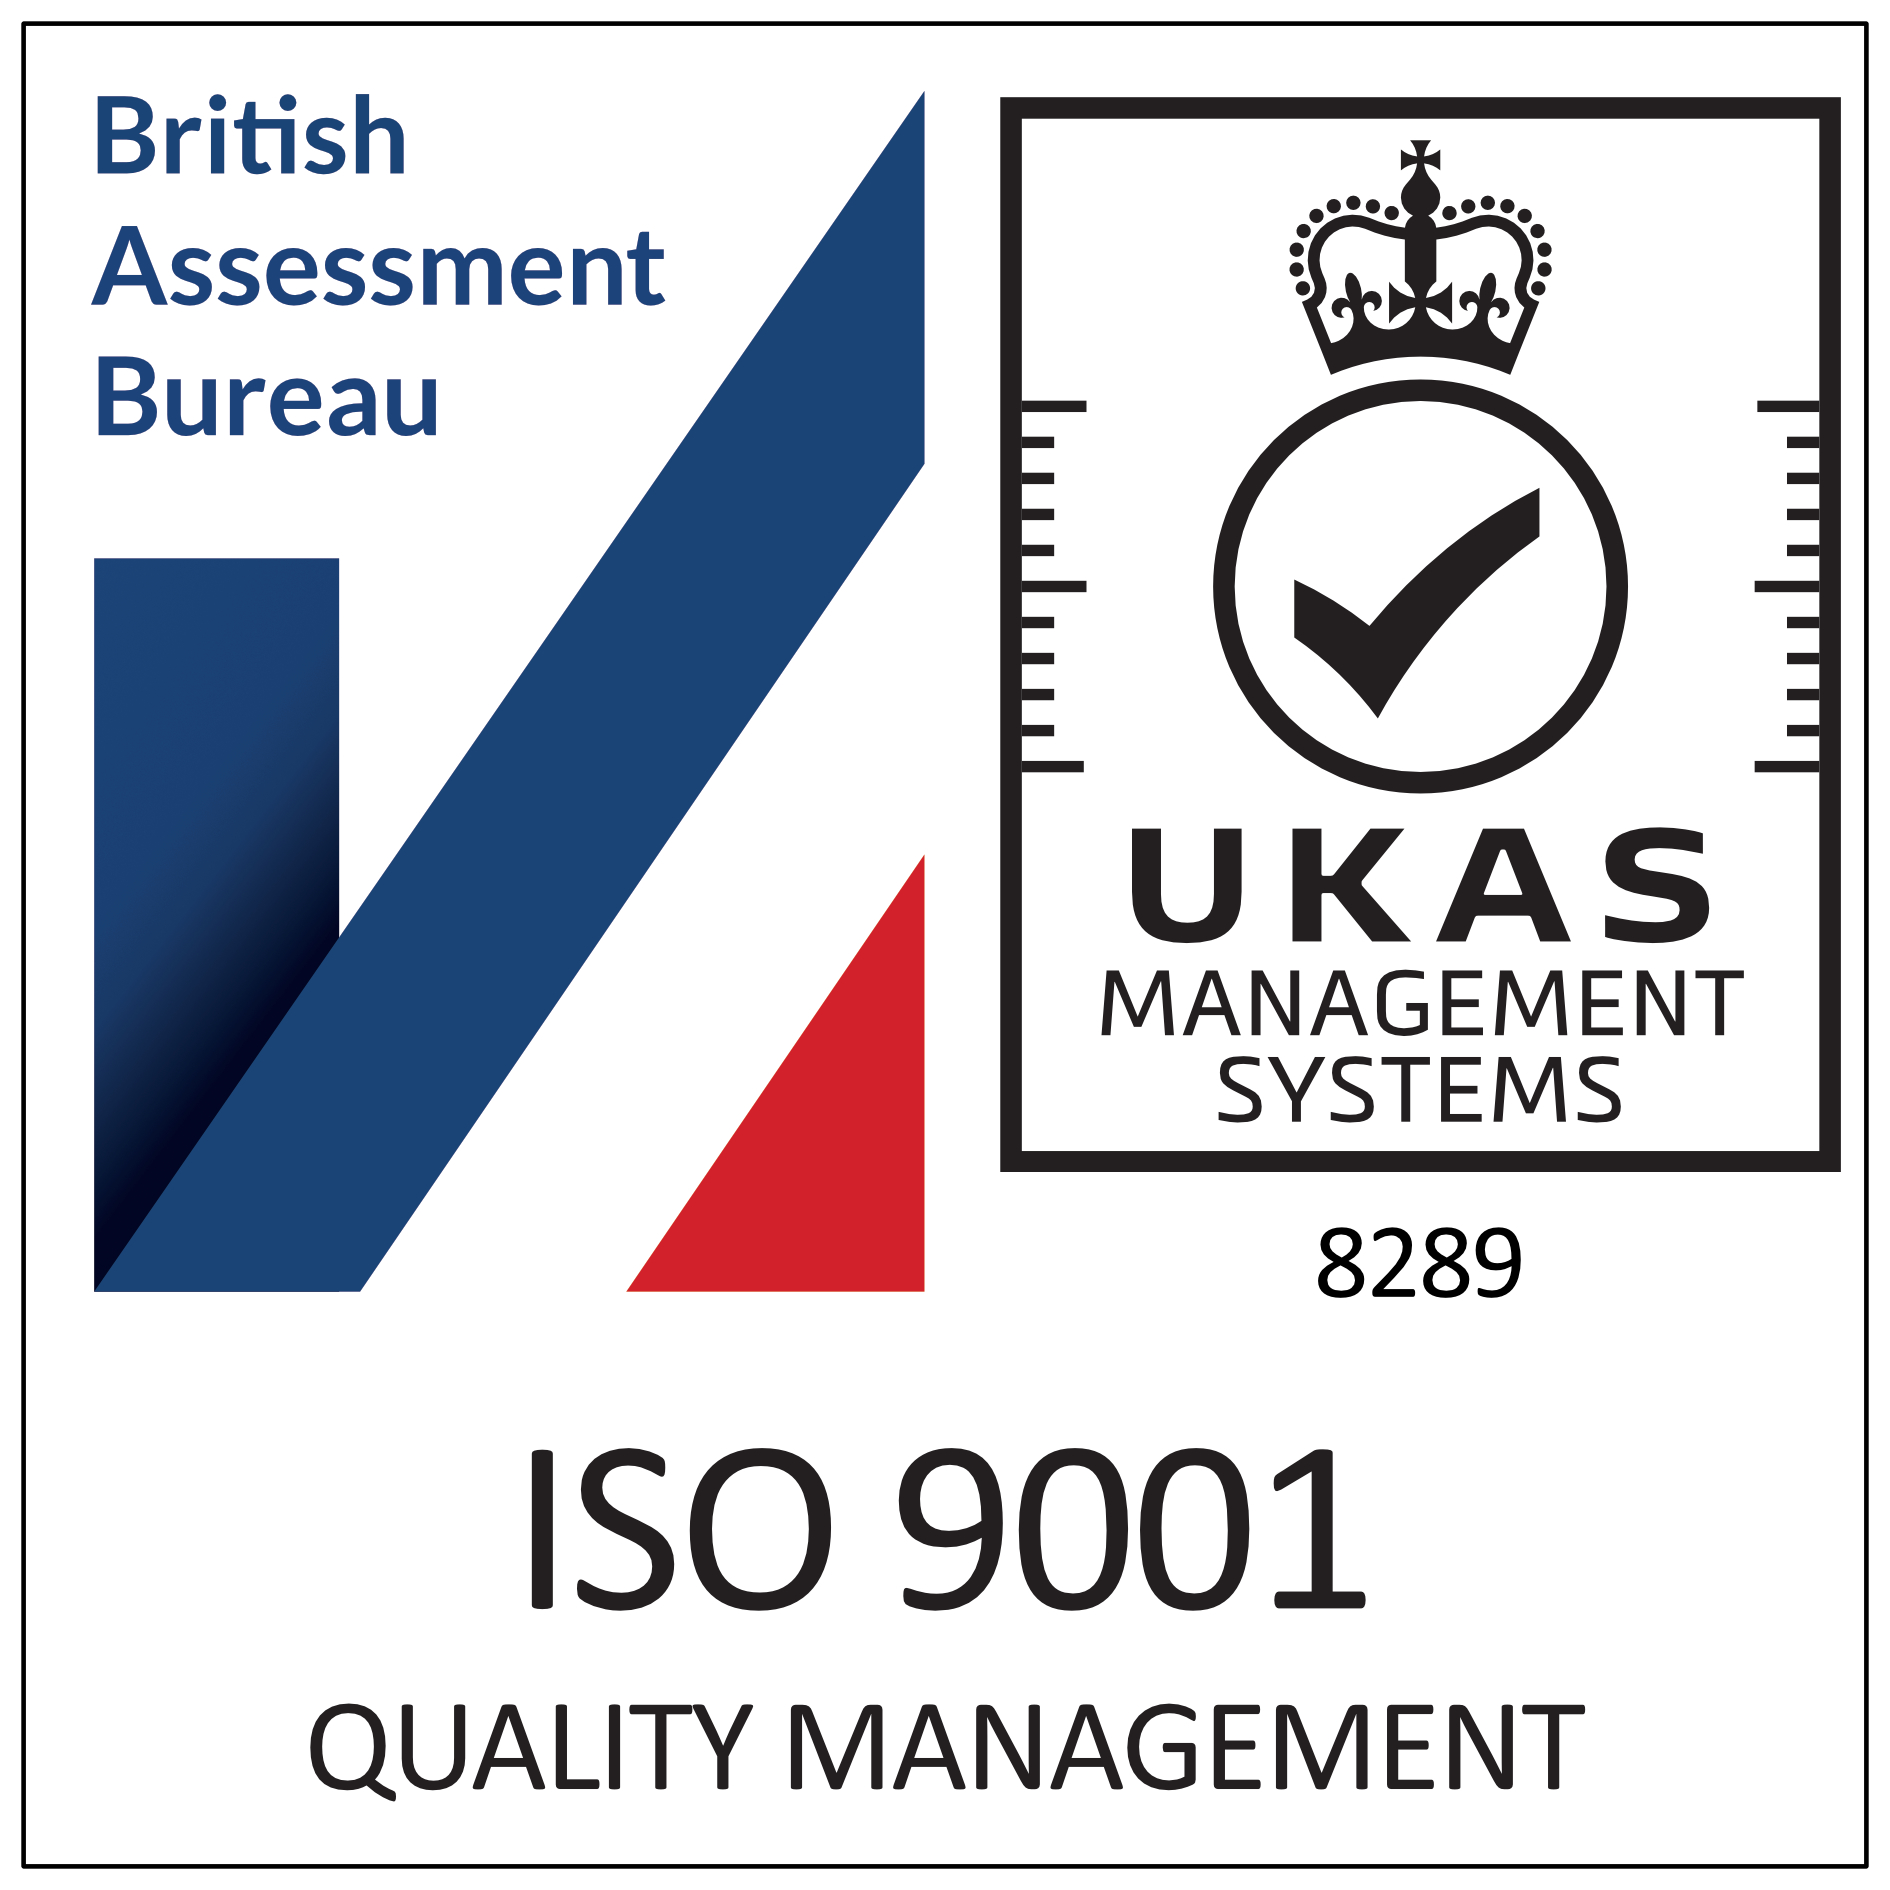 Cardiff, Wales, United Kingdom : L’agence Plus Your Business remporte le prix ISO 9001 certified